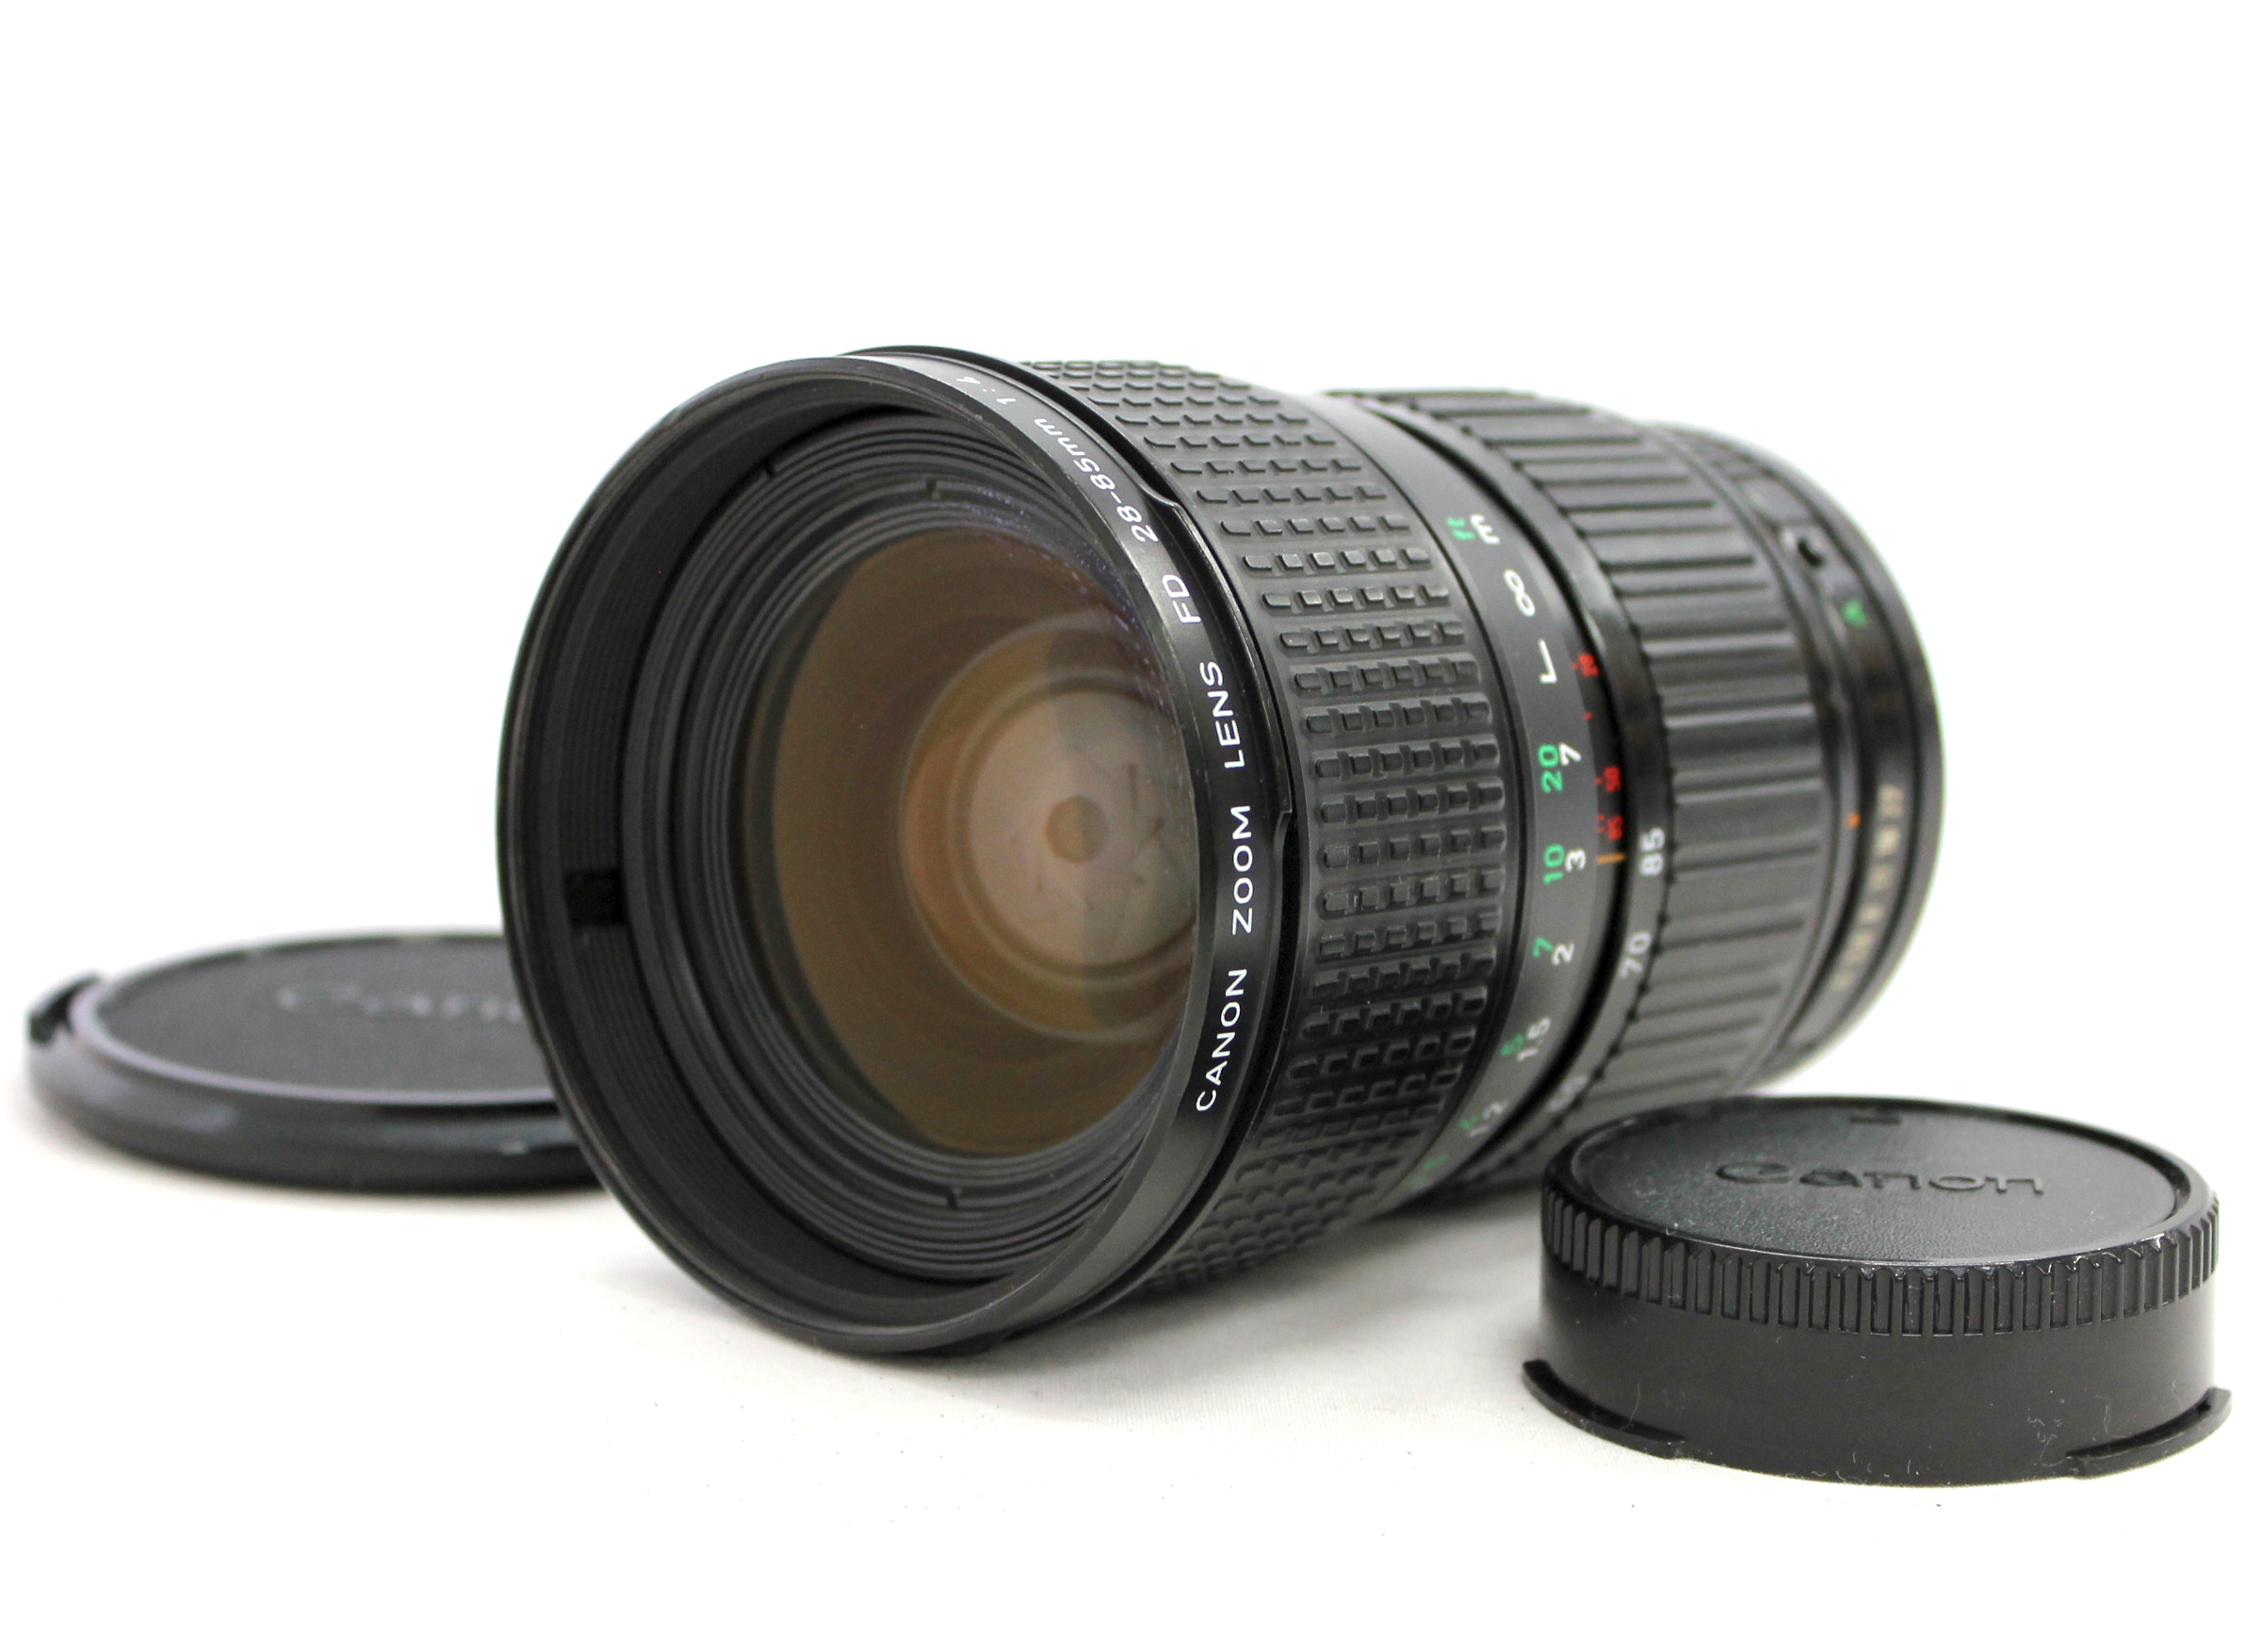 Japan Used Camera Shop | [Excellent++++] Canon New FD NFD 28-85mm F4 Macro Zoom Lens from Japan